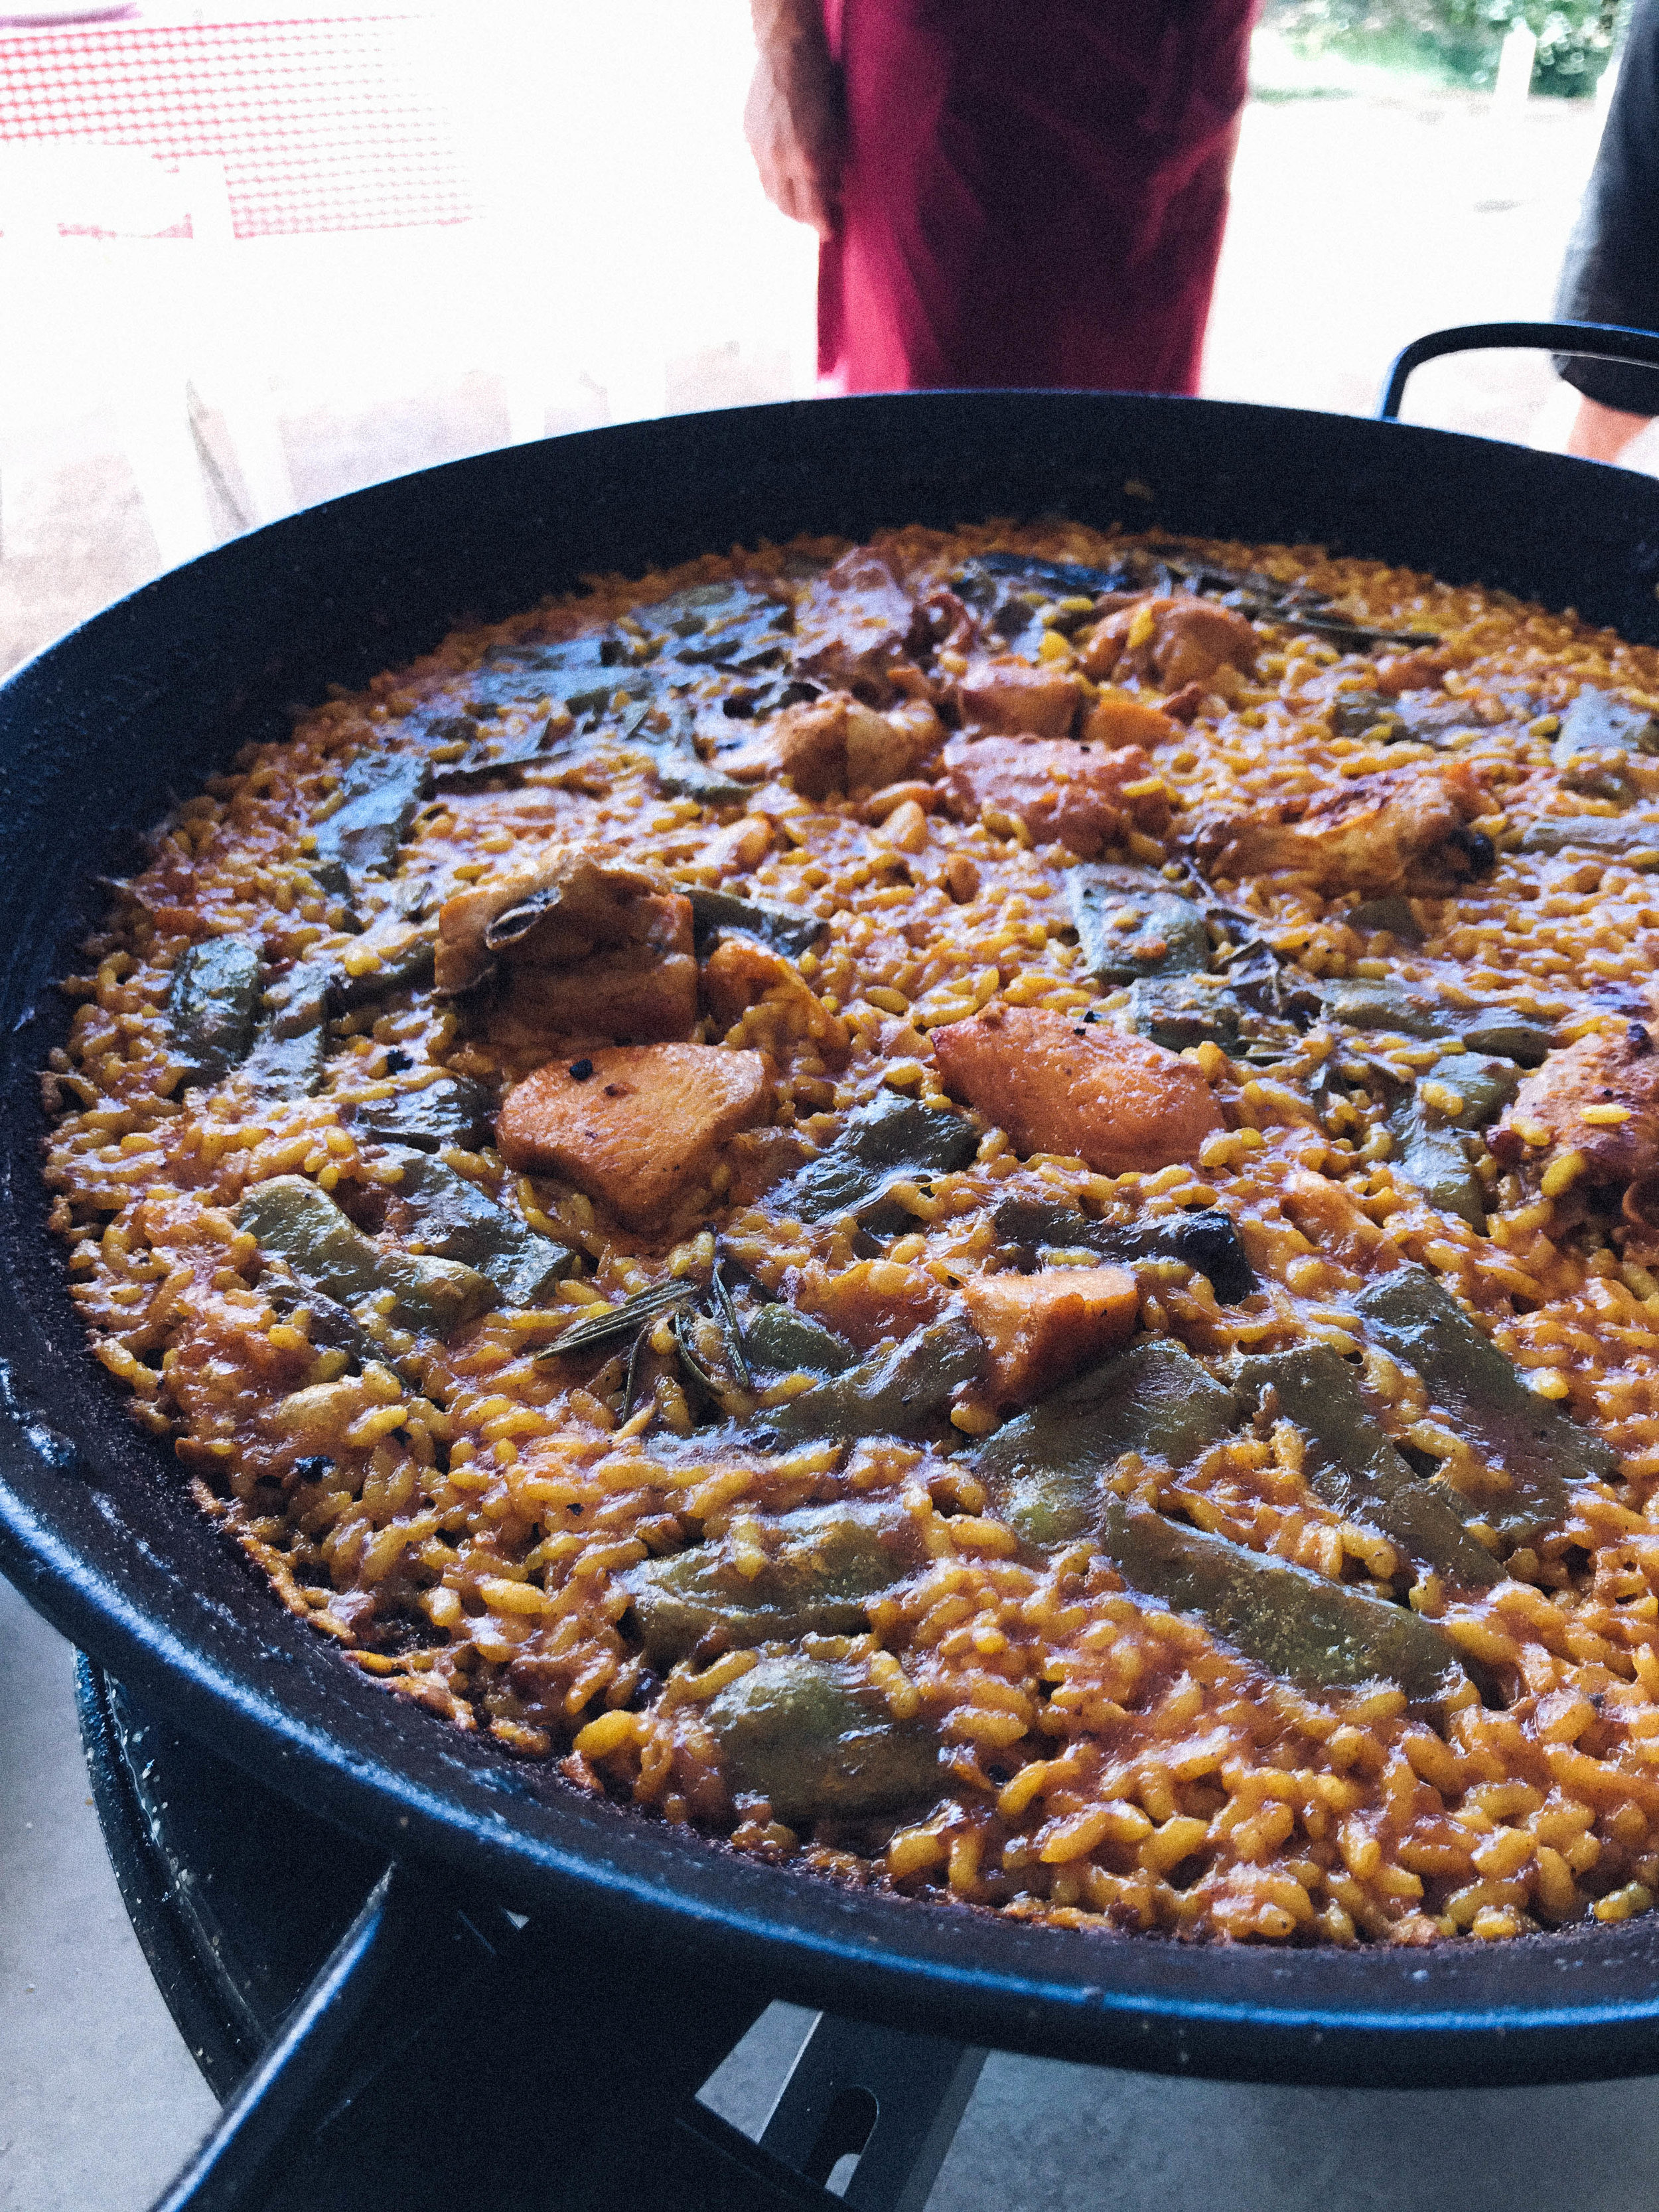 Paella Cooking - Photo Diary in Sueca Valencia image asset